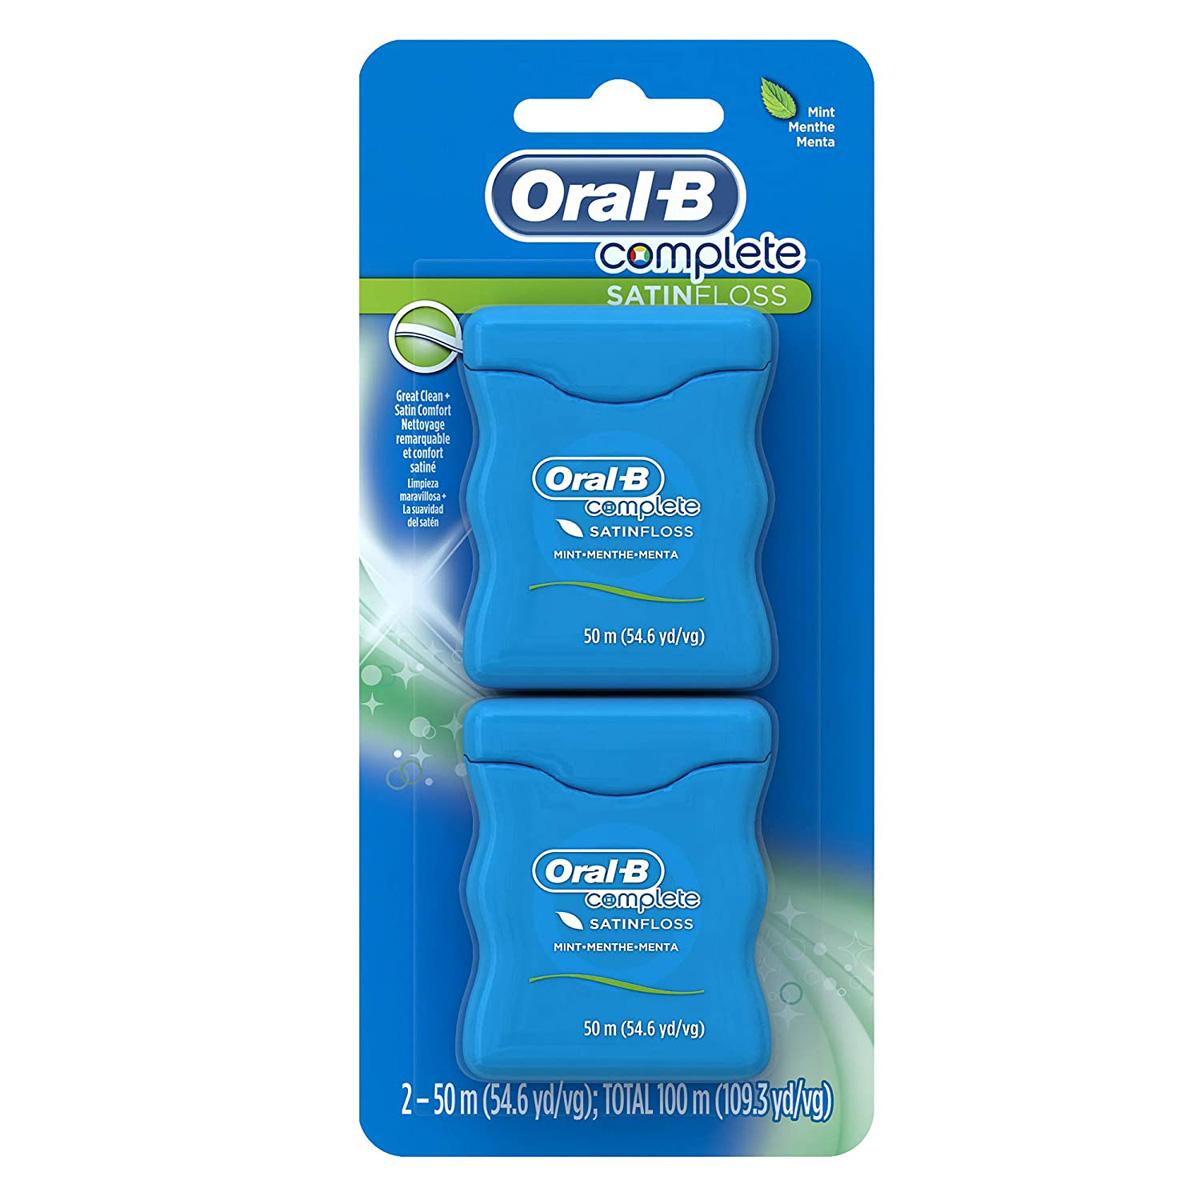 2 Oral-B Complete SatinFloss Dental Floss for $2.92 Shipped